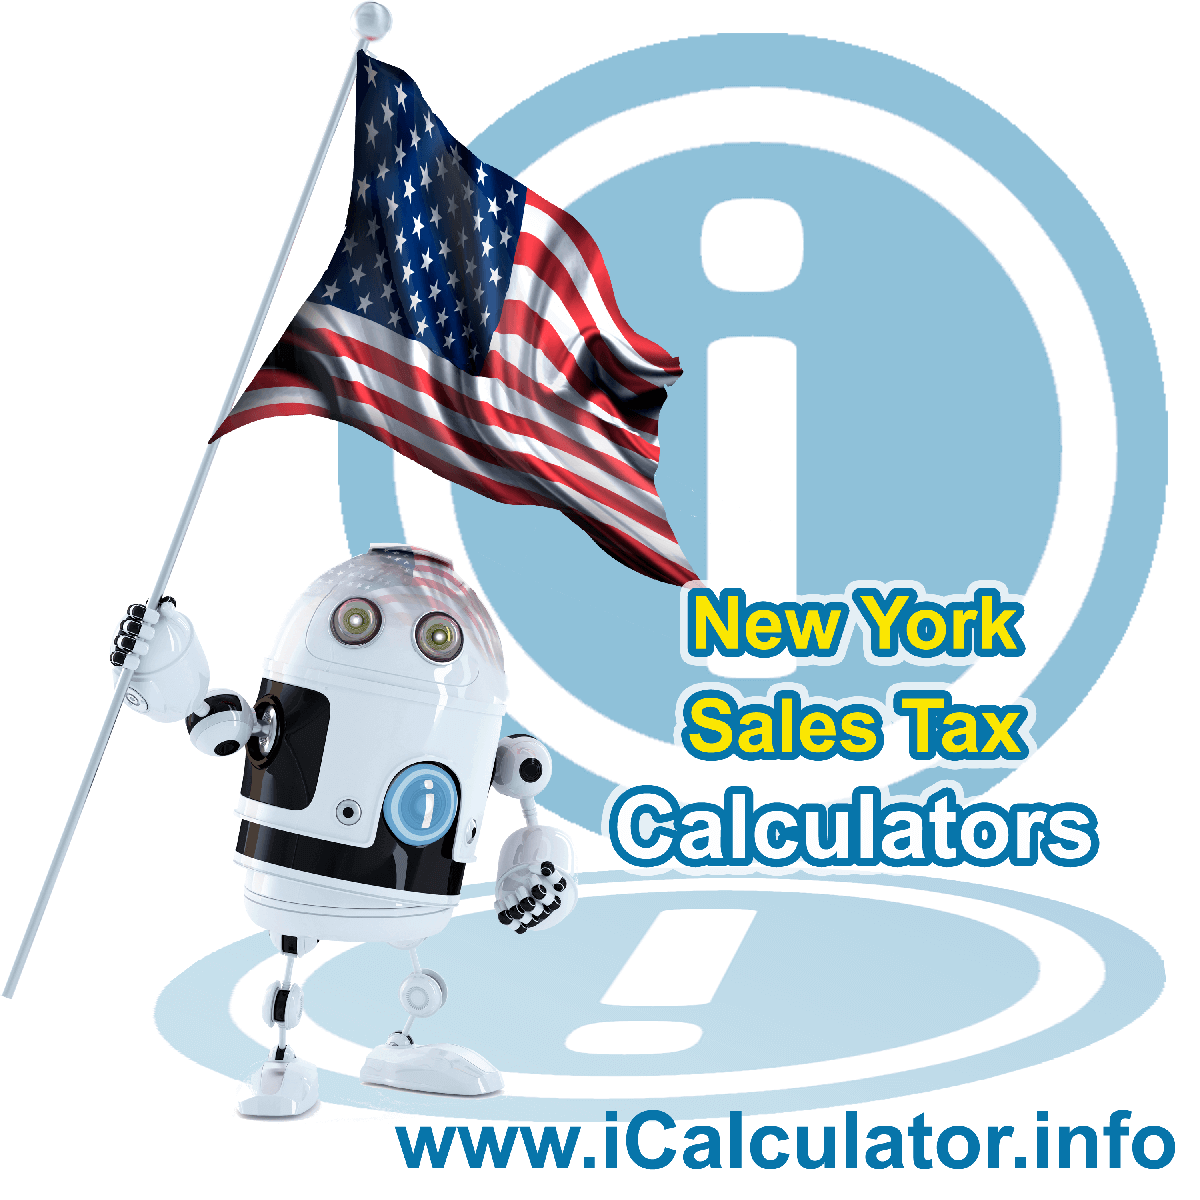 New York Sales Tax Comparison Calculator: This image illustrates a calculator robot comparing sales tax in New York manually using the New York Sales Tax Formula. You can use this information to compare Sales Tax manually or use the New York Sales Tax Comparison Calculator to calculate and compare New York sales tax online.